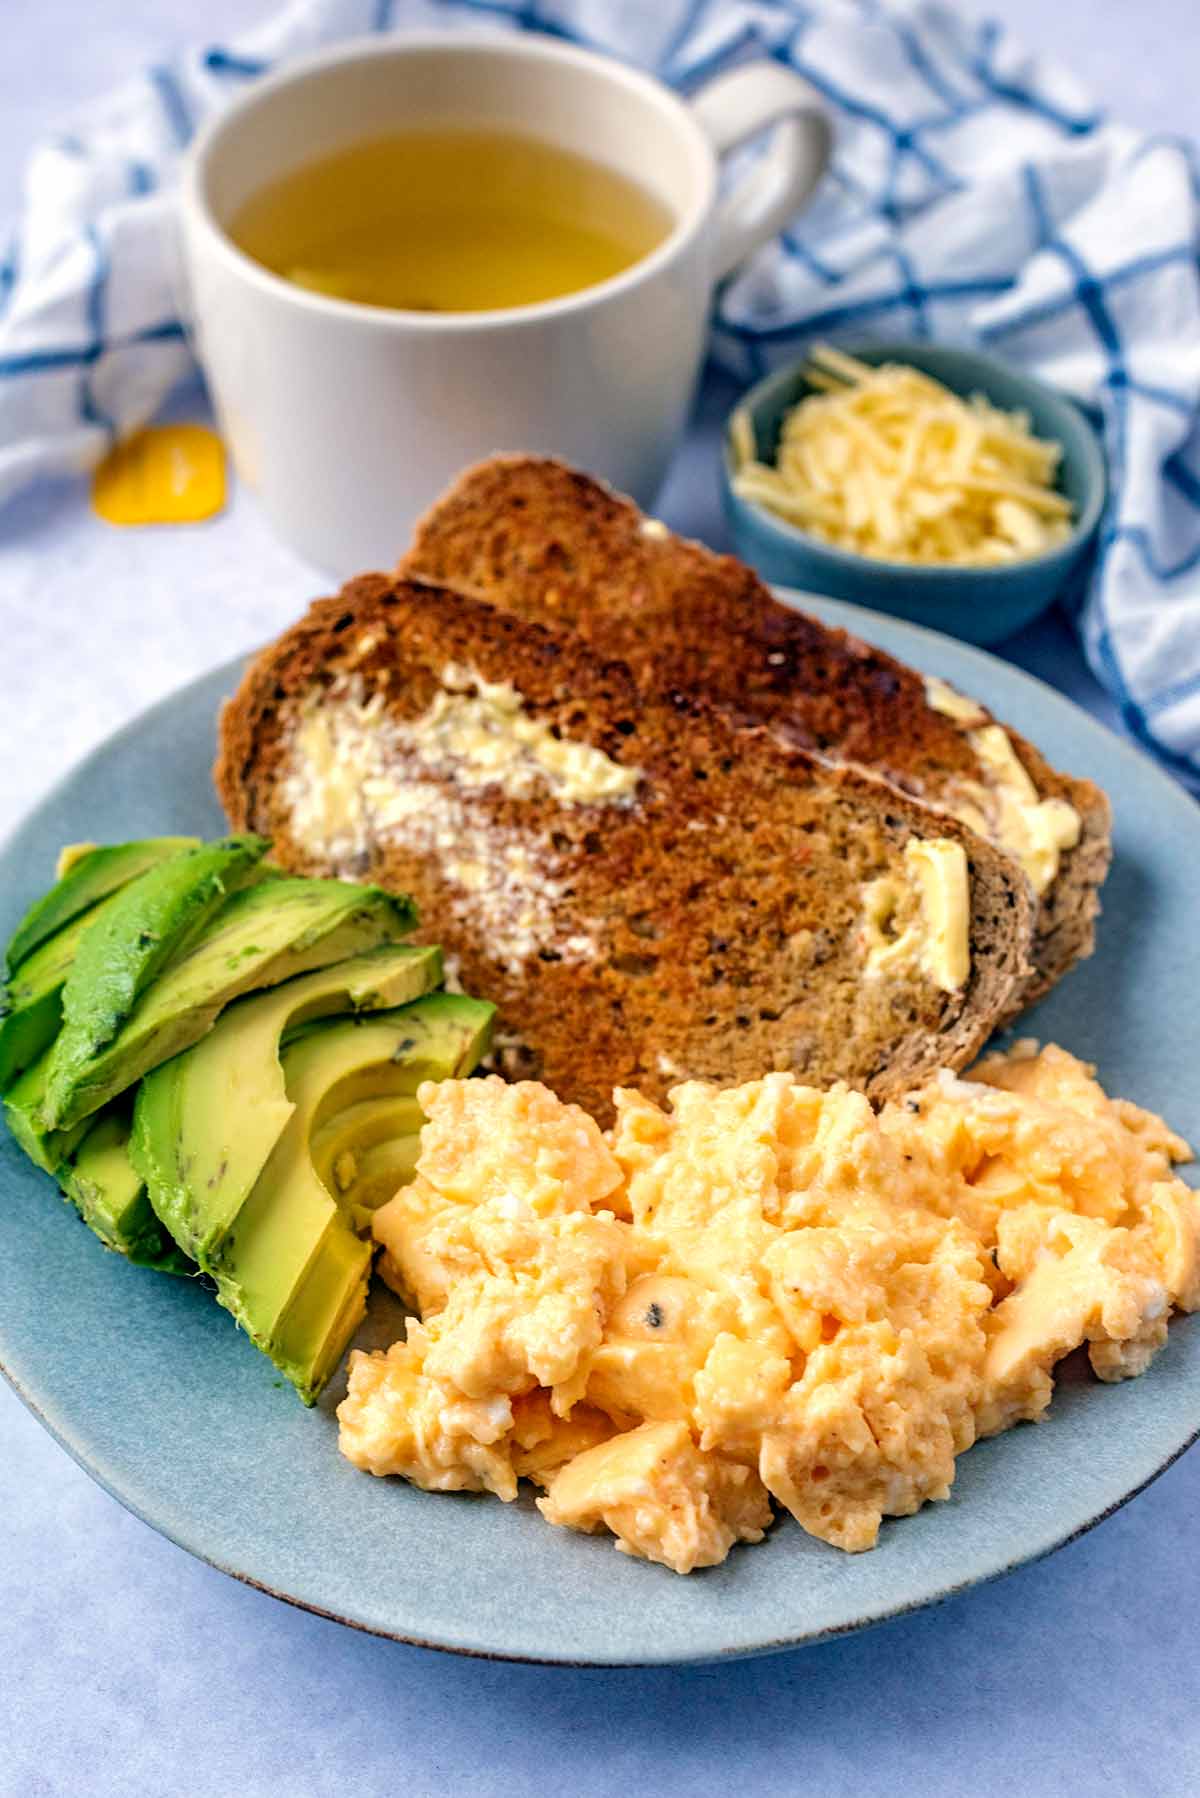 Scrambled eggs and toast in front of a mug of fruit tea.